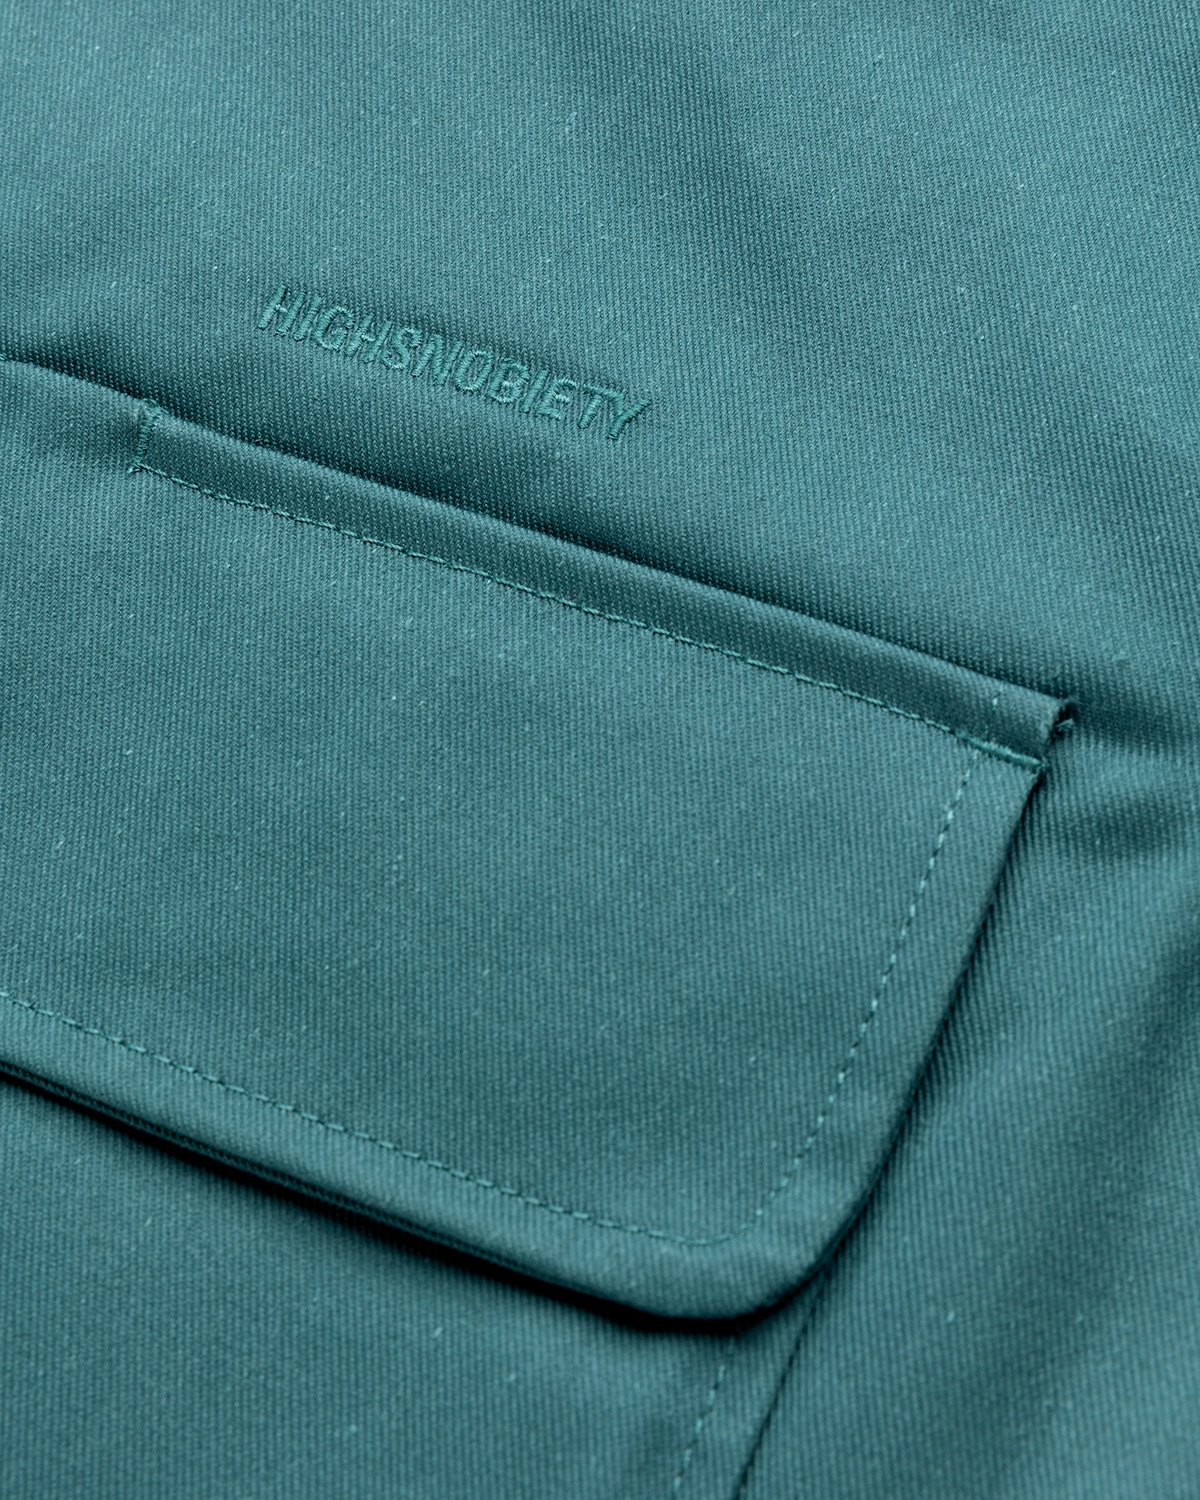 Highsnobiety x Dickies - Service Shirt Lincoln Green - Clothing - Green - Image 4